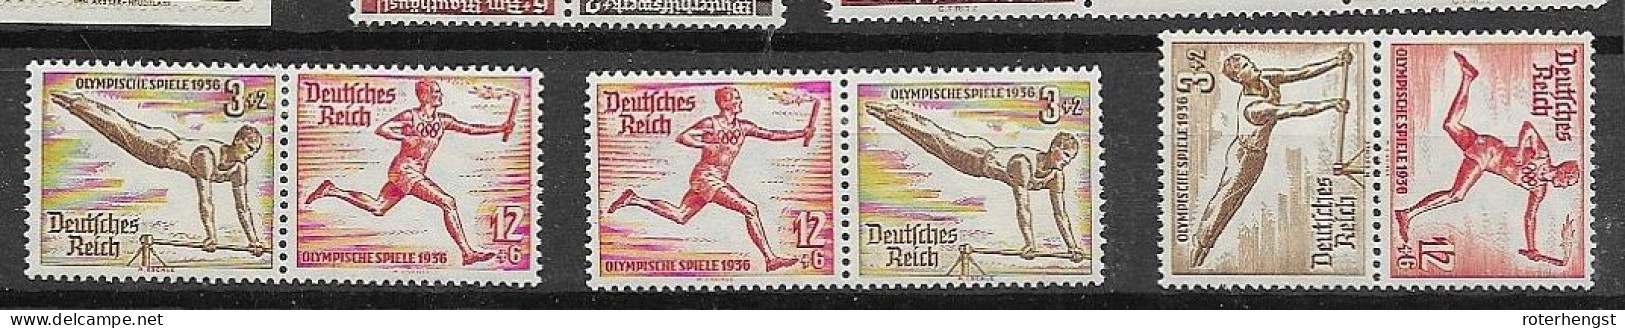 Reich From Booklet Panes 1936 Mlh *  And Mnh ** (right Better Pair) 44 Euros - Postzegelboekjes